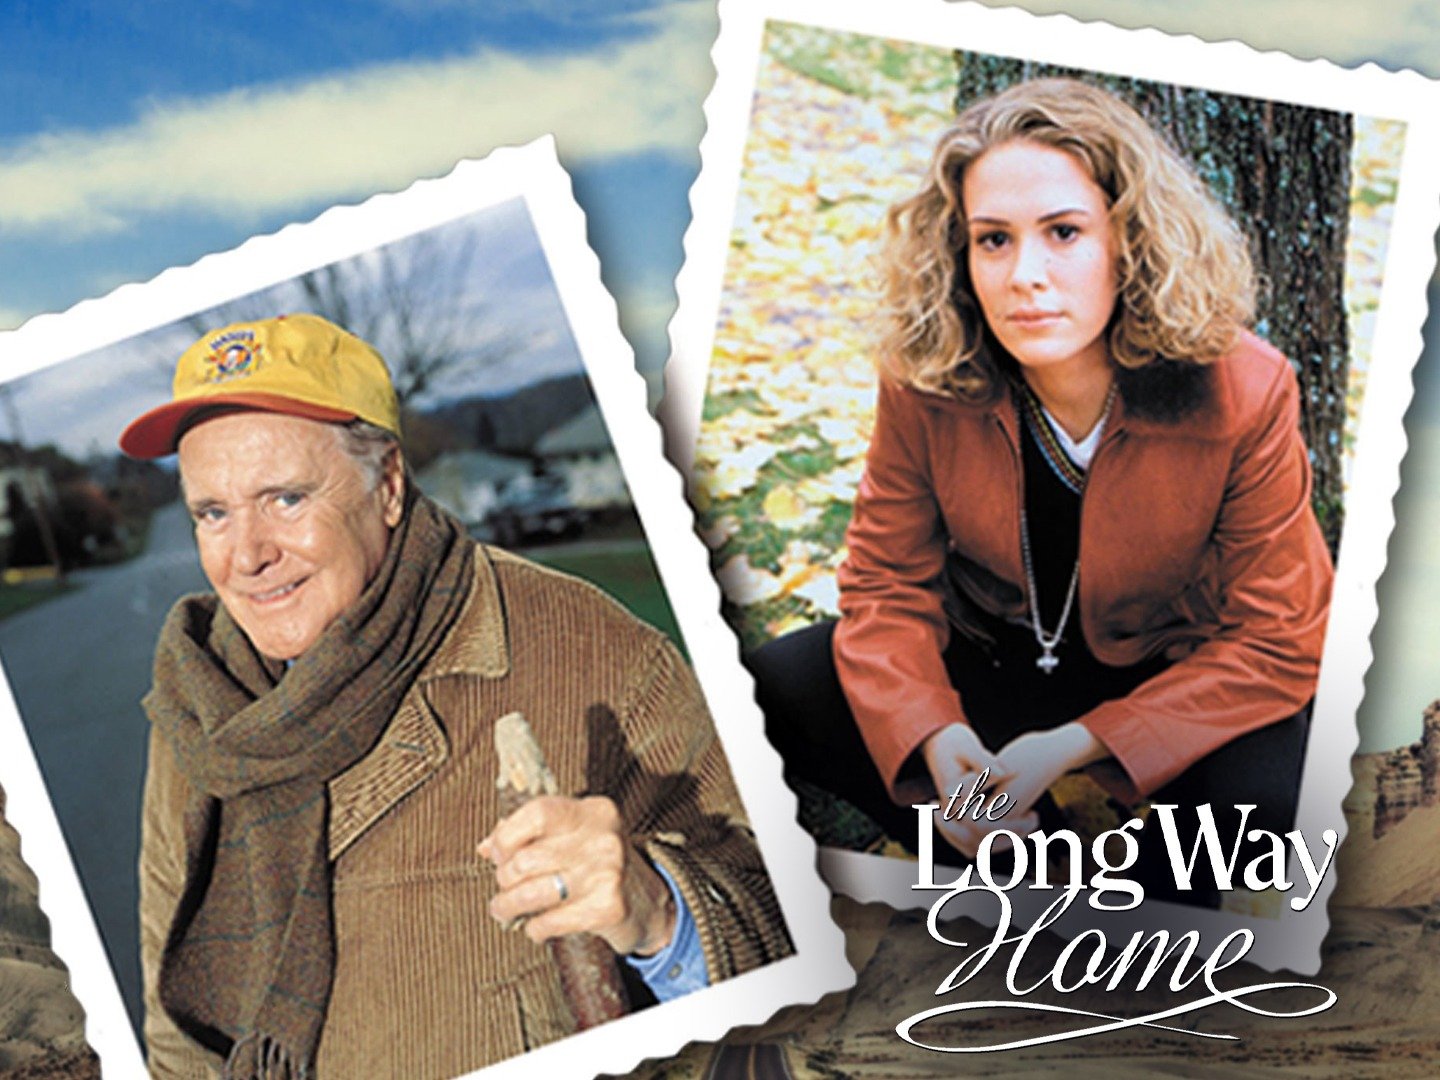 lion a long way home movie banner